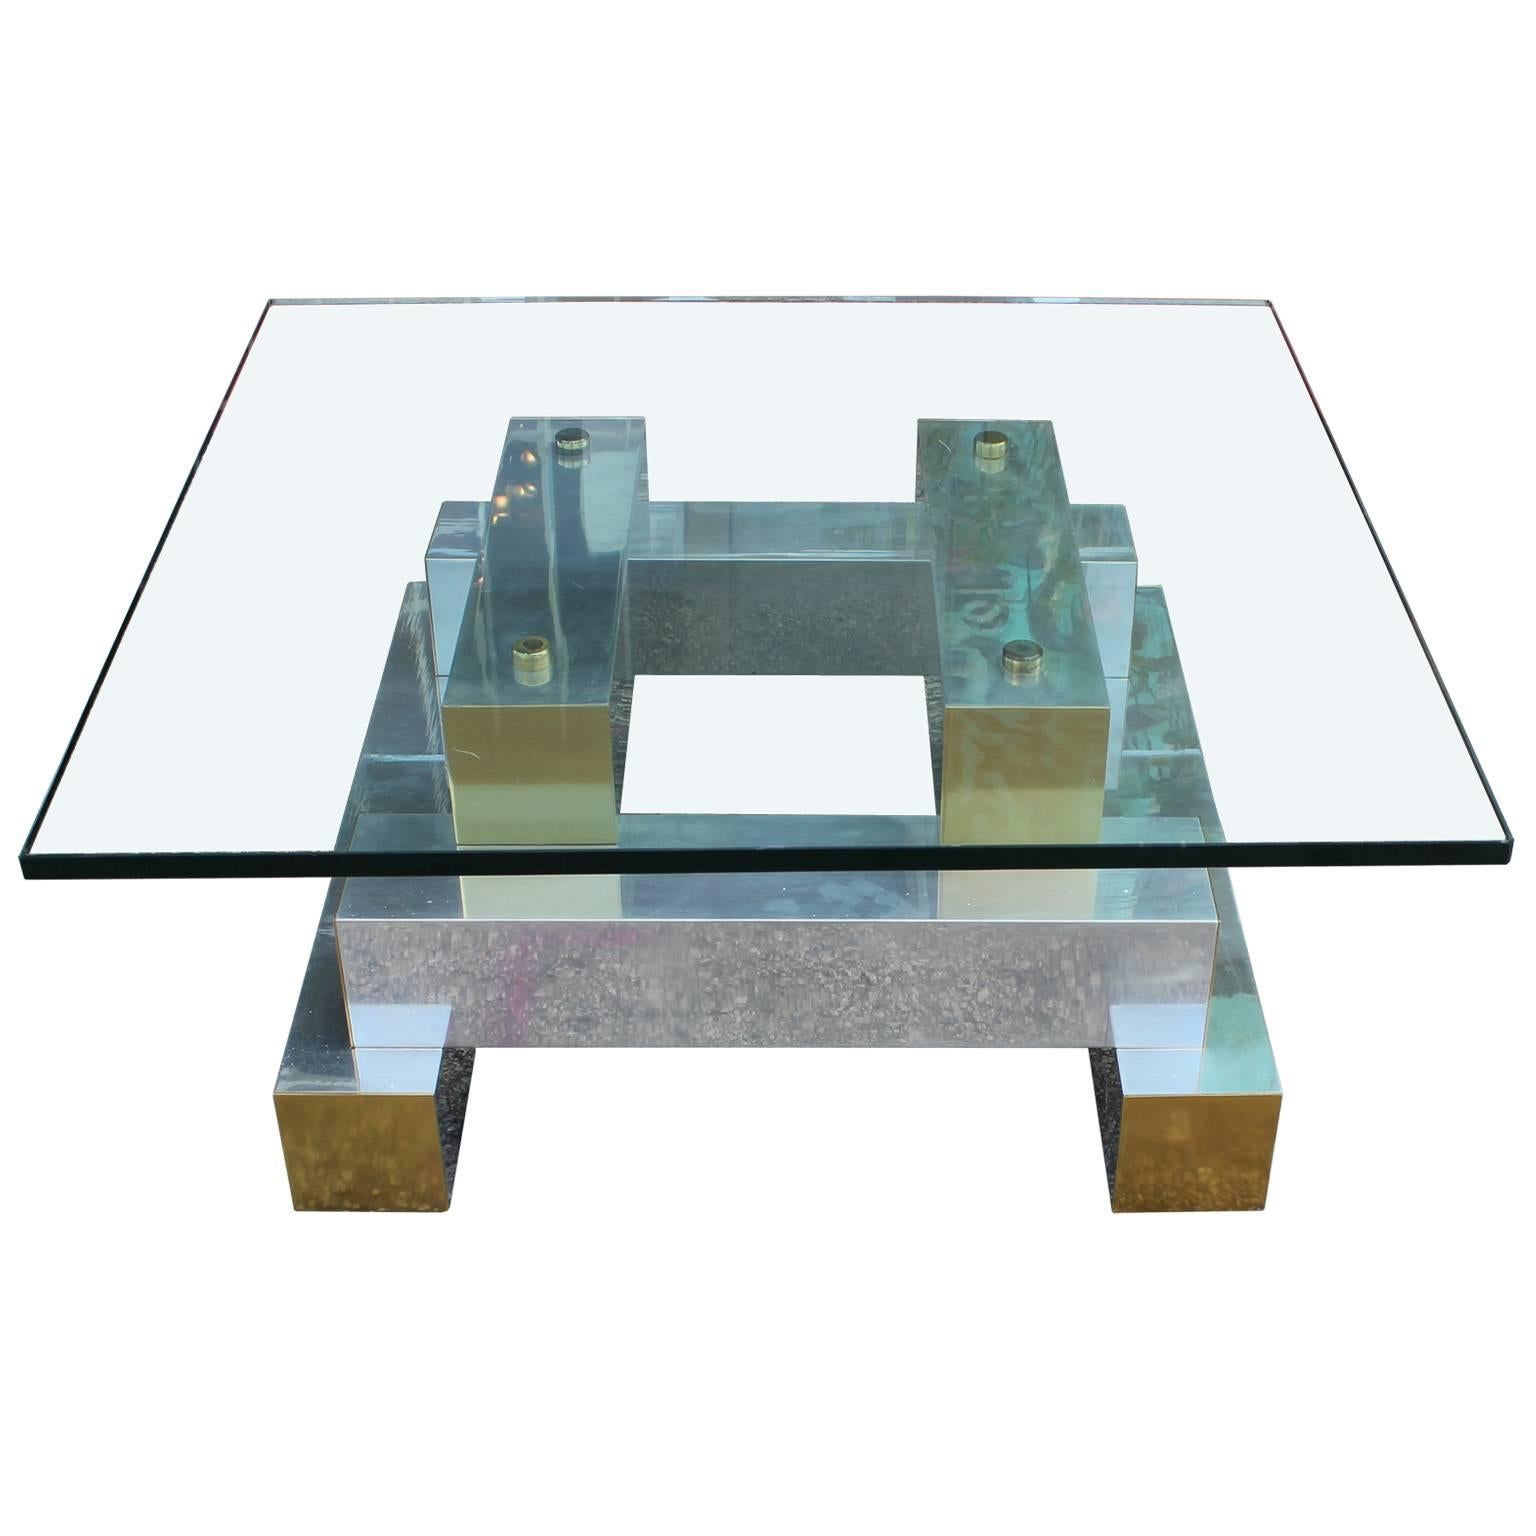 Bold glass topped brutalist coffee table. Chunky base is polished aluminum with brass accents. Topped with a thick piece of square cut glass. The perfect addition to a modern, Mid-Century, Brutalist, or Hollywood regency style space. In the style of